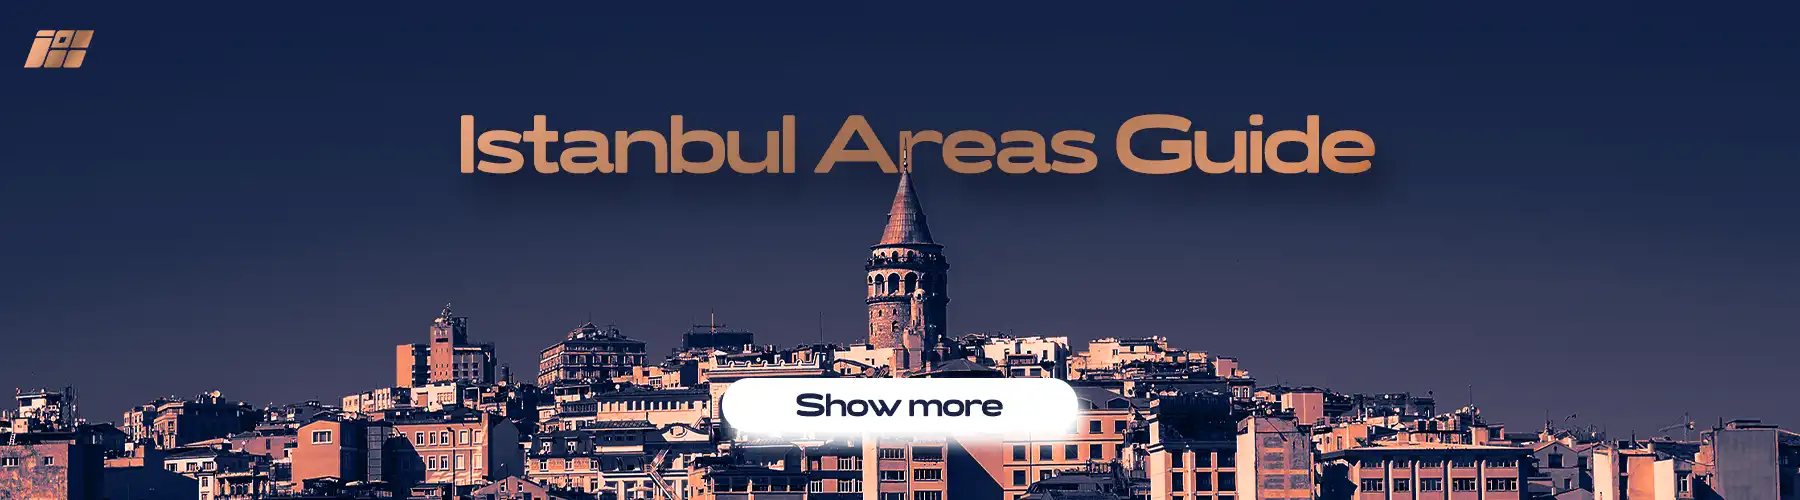 Istanbul areas guide,